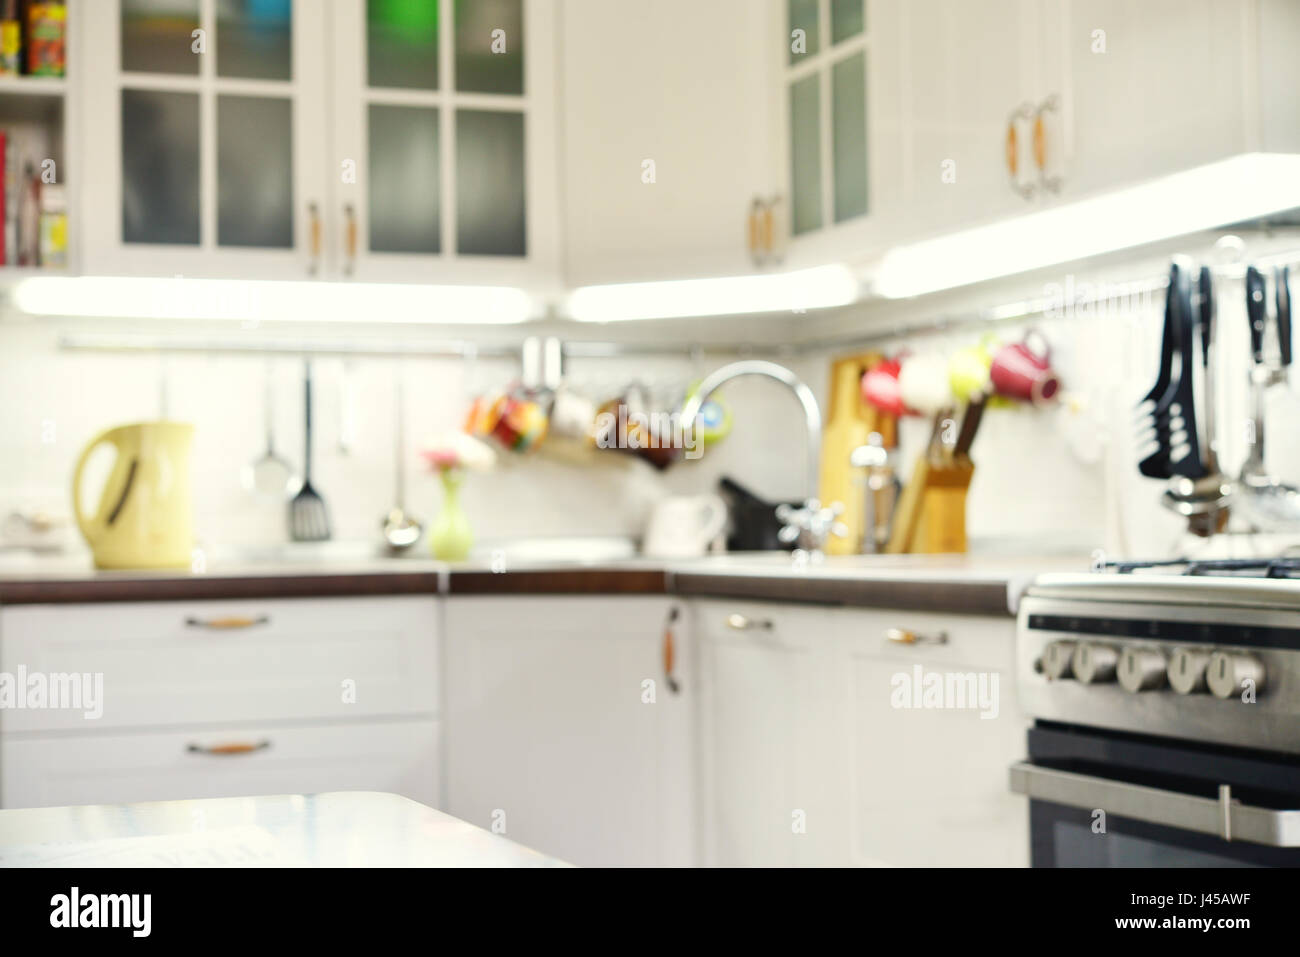 Blurred background. Modern kitchen with railings system  and kitchen utensils. Stock Photo